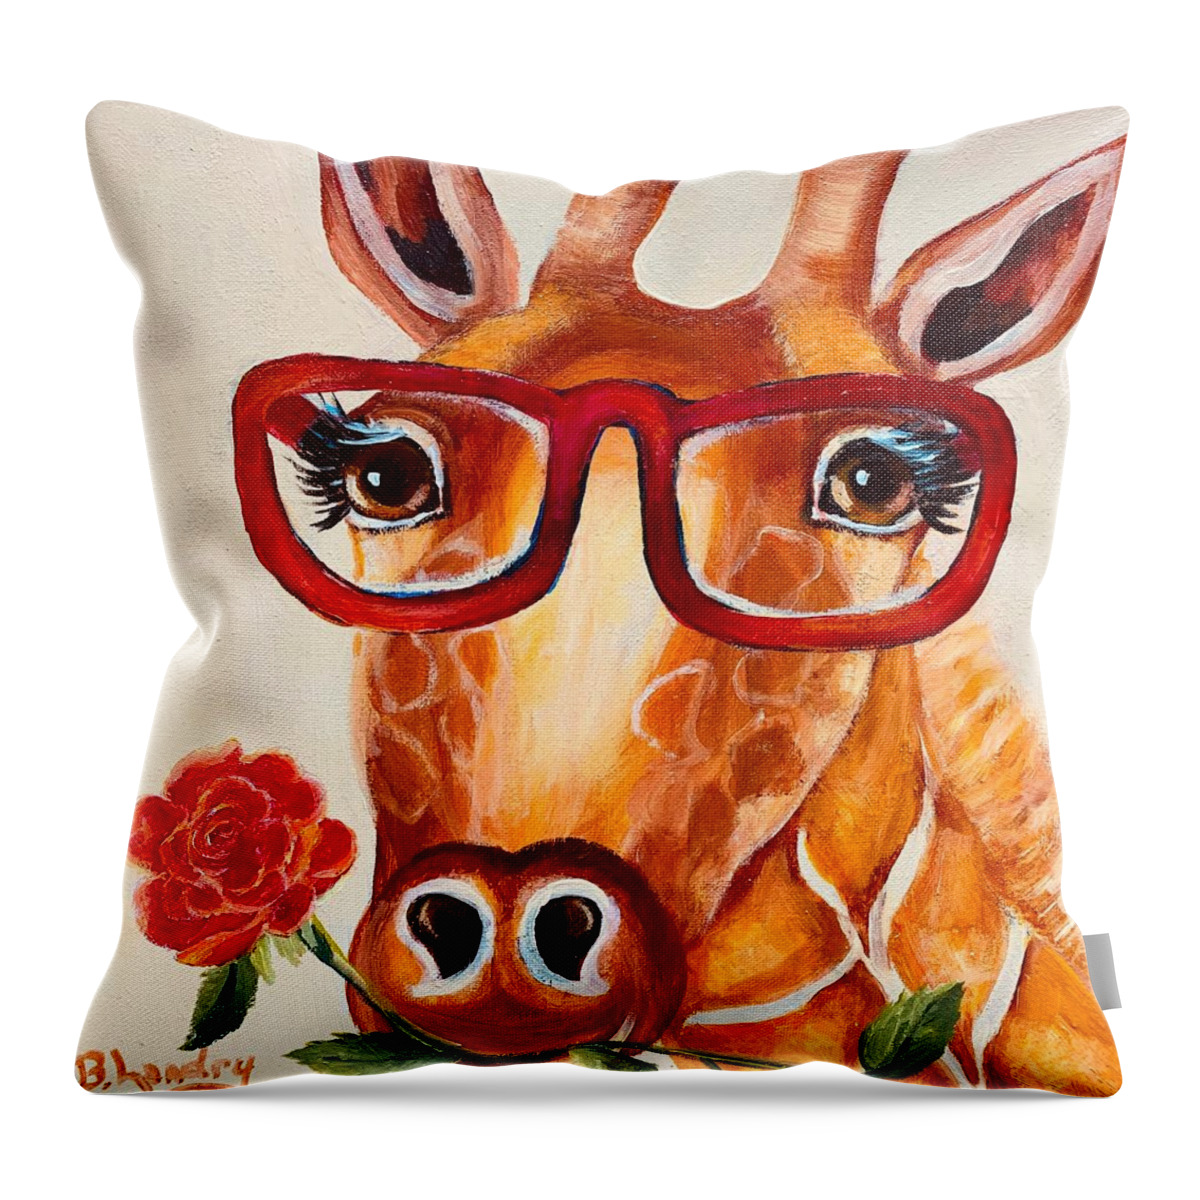 Giraffe Throw Pillow featuring the painting Bright Eyes by Barbara Landry